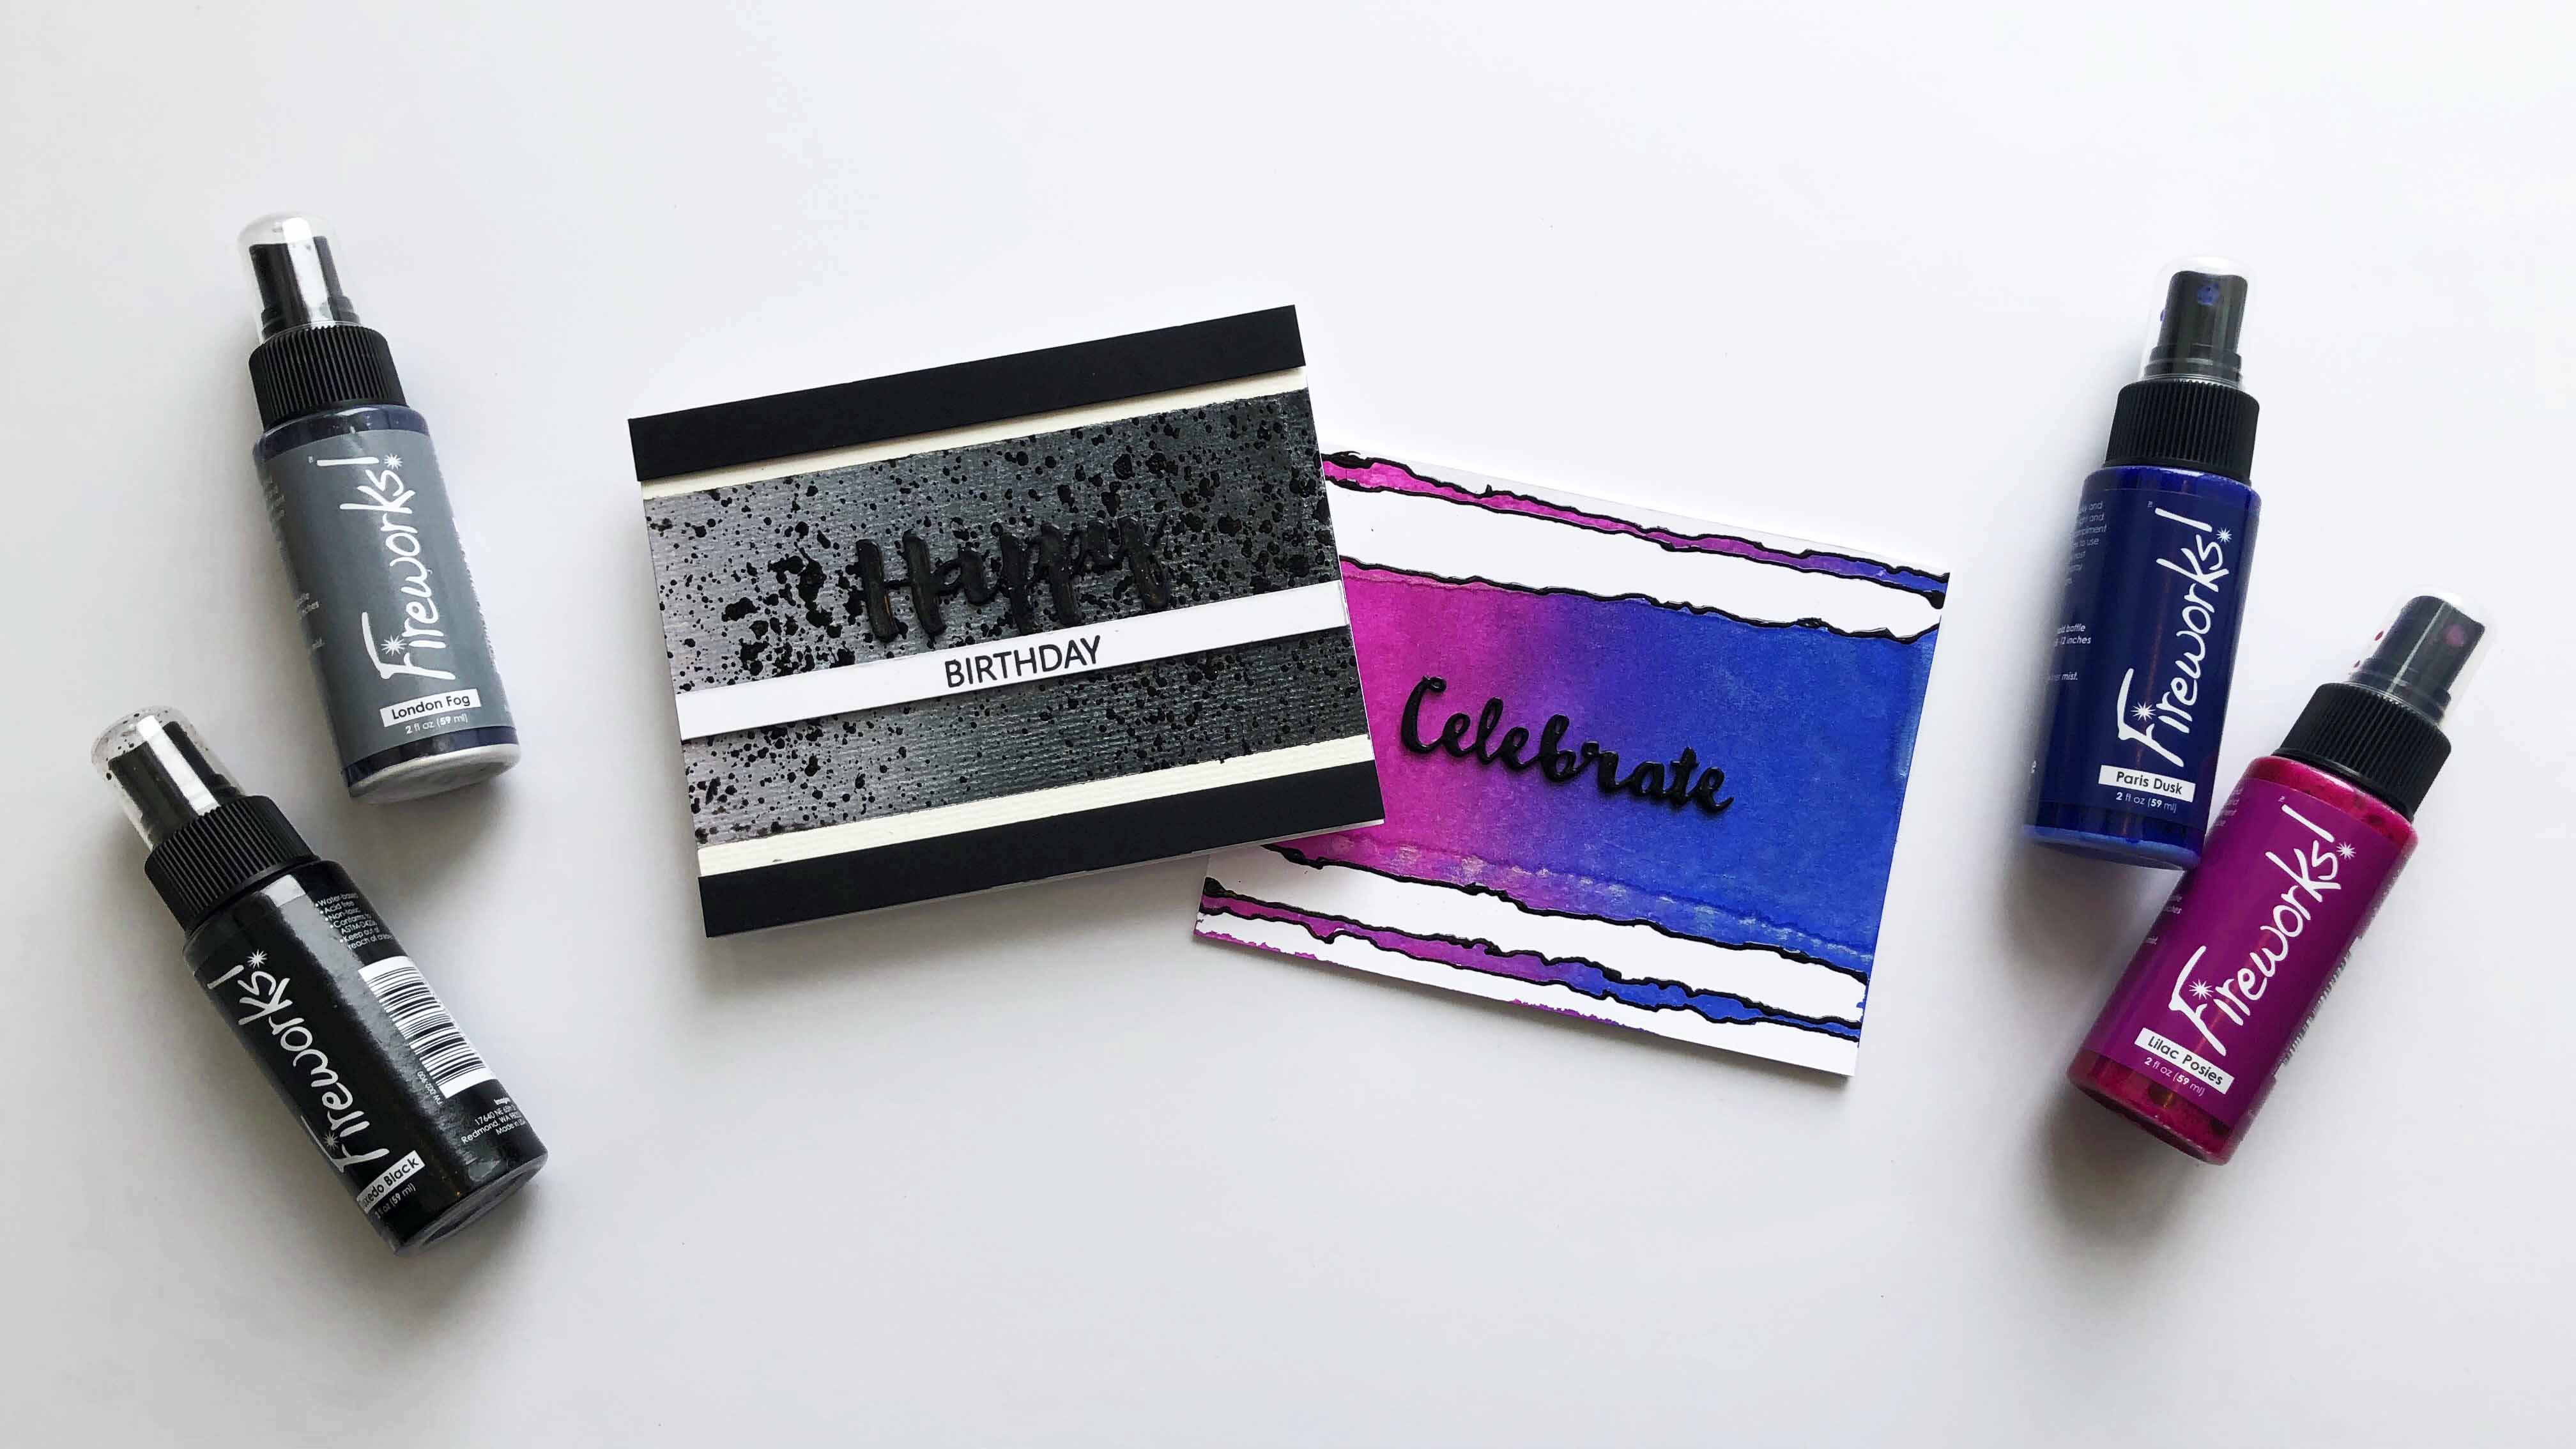 Two handmade birthday cards made with blended ink backgrounds made with Fireworks Shimmery Craft Spray